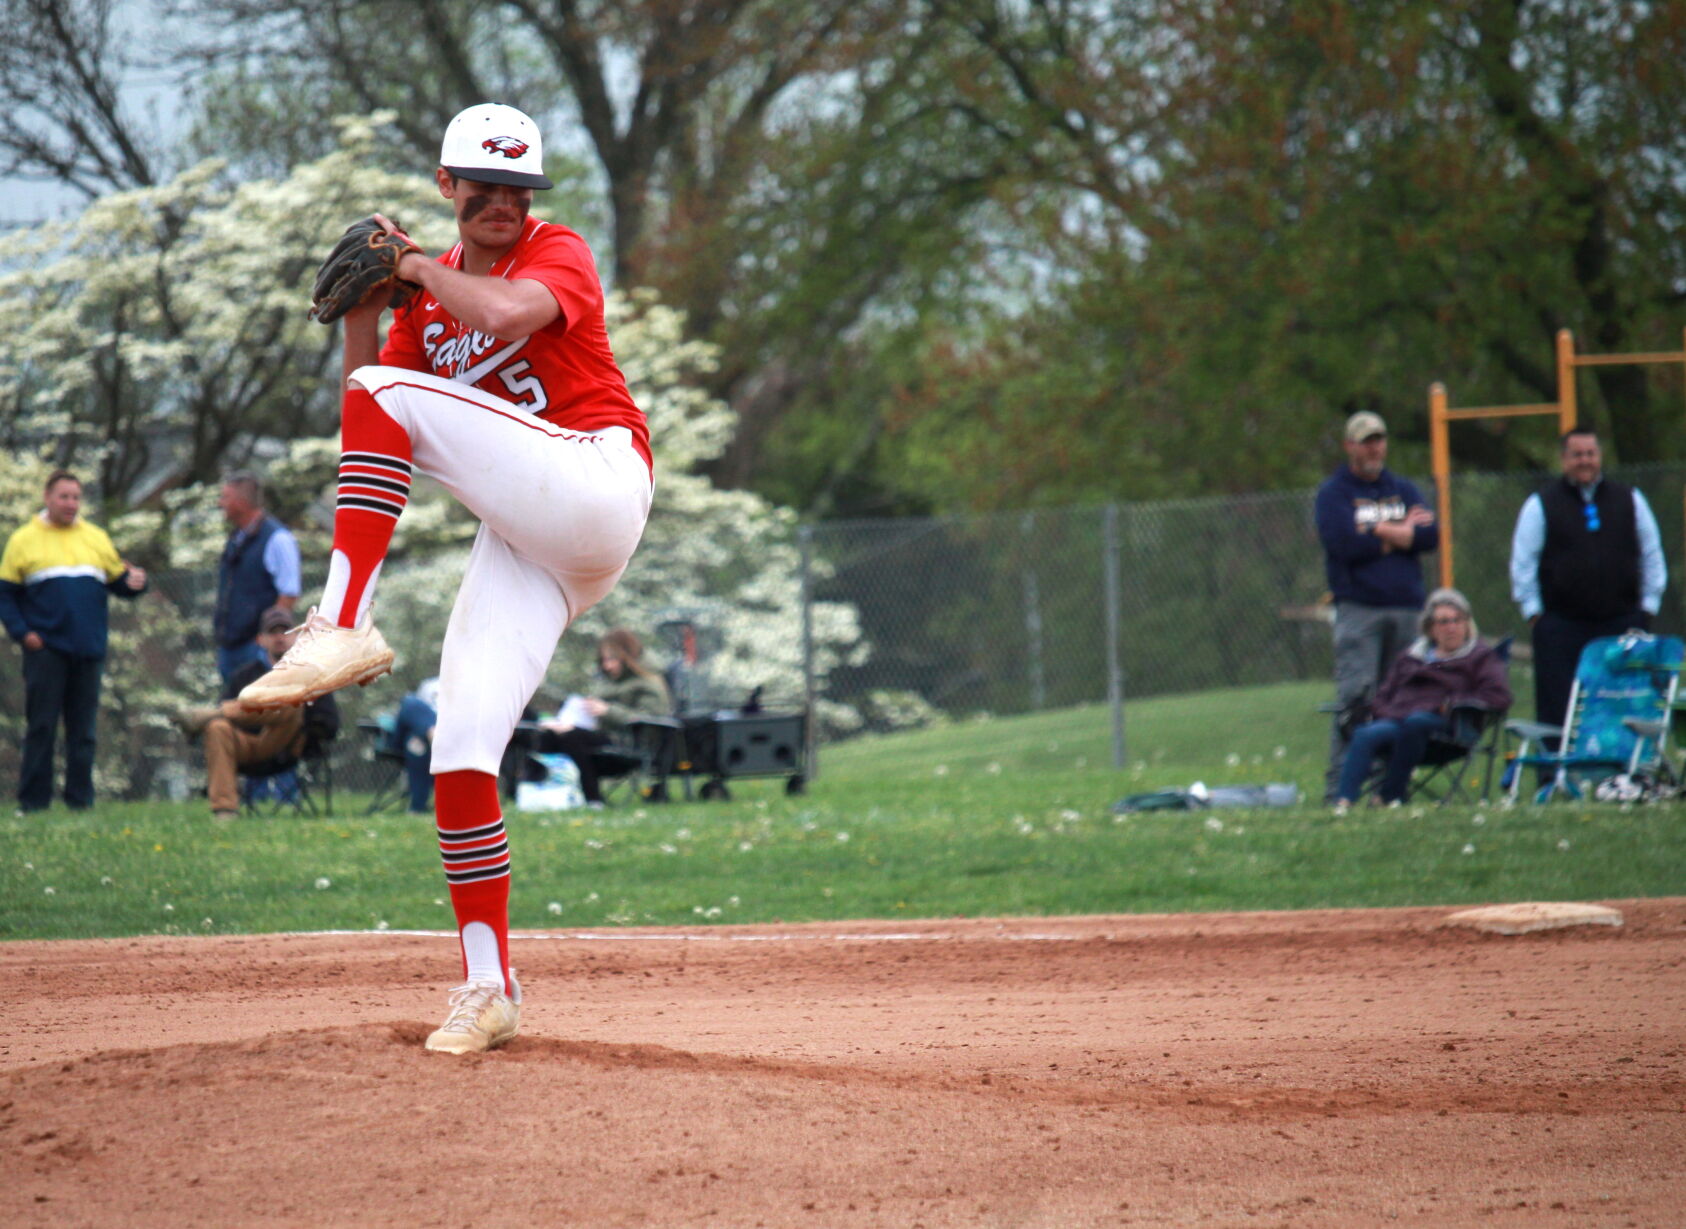 Bohemia Manor’s Strong Pitching Leads to 7-4 Victory Over Perryville